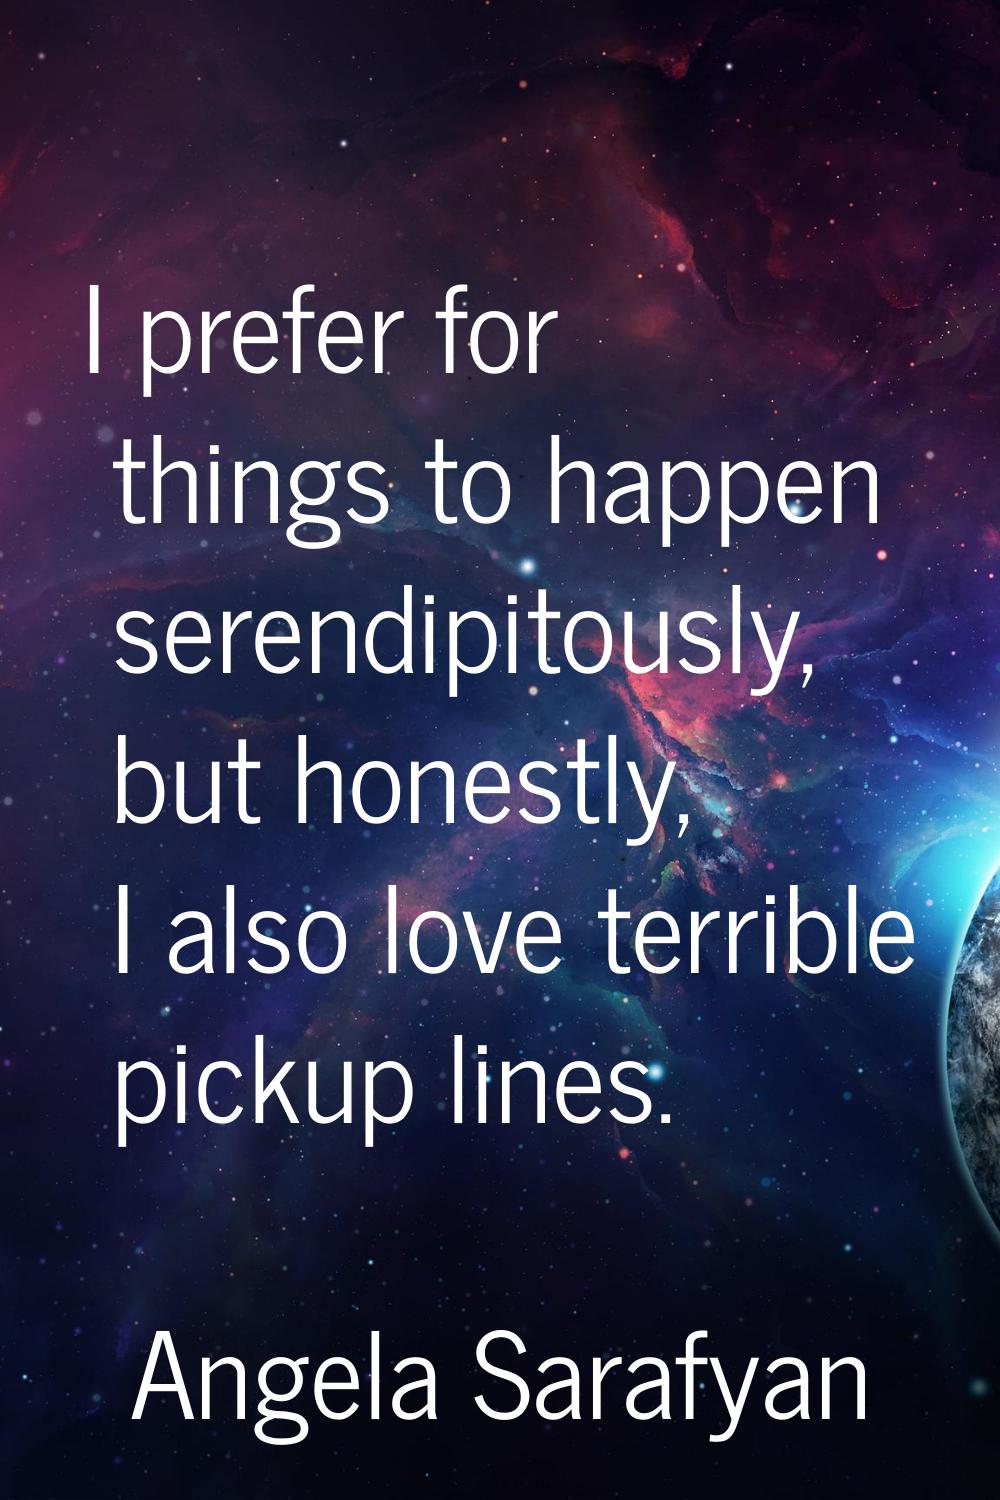 I prefer for things to happen serendipitously, but honestly, I also love terrible pickup lines.